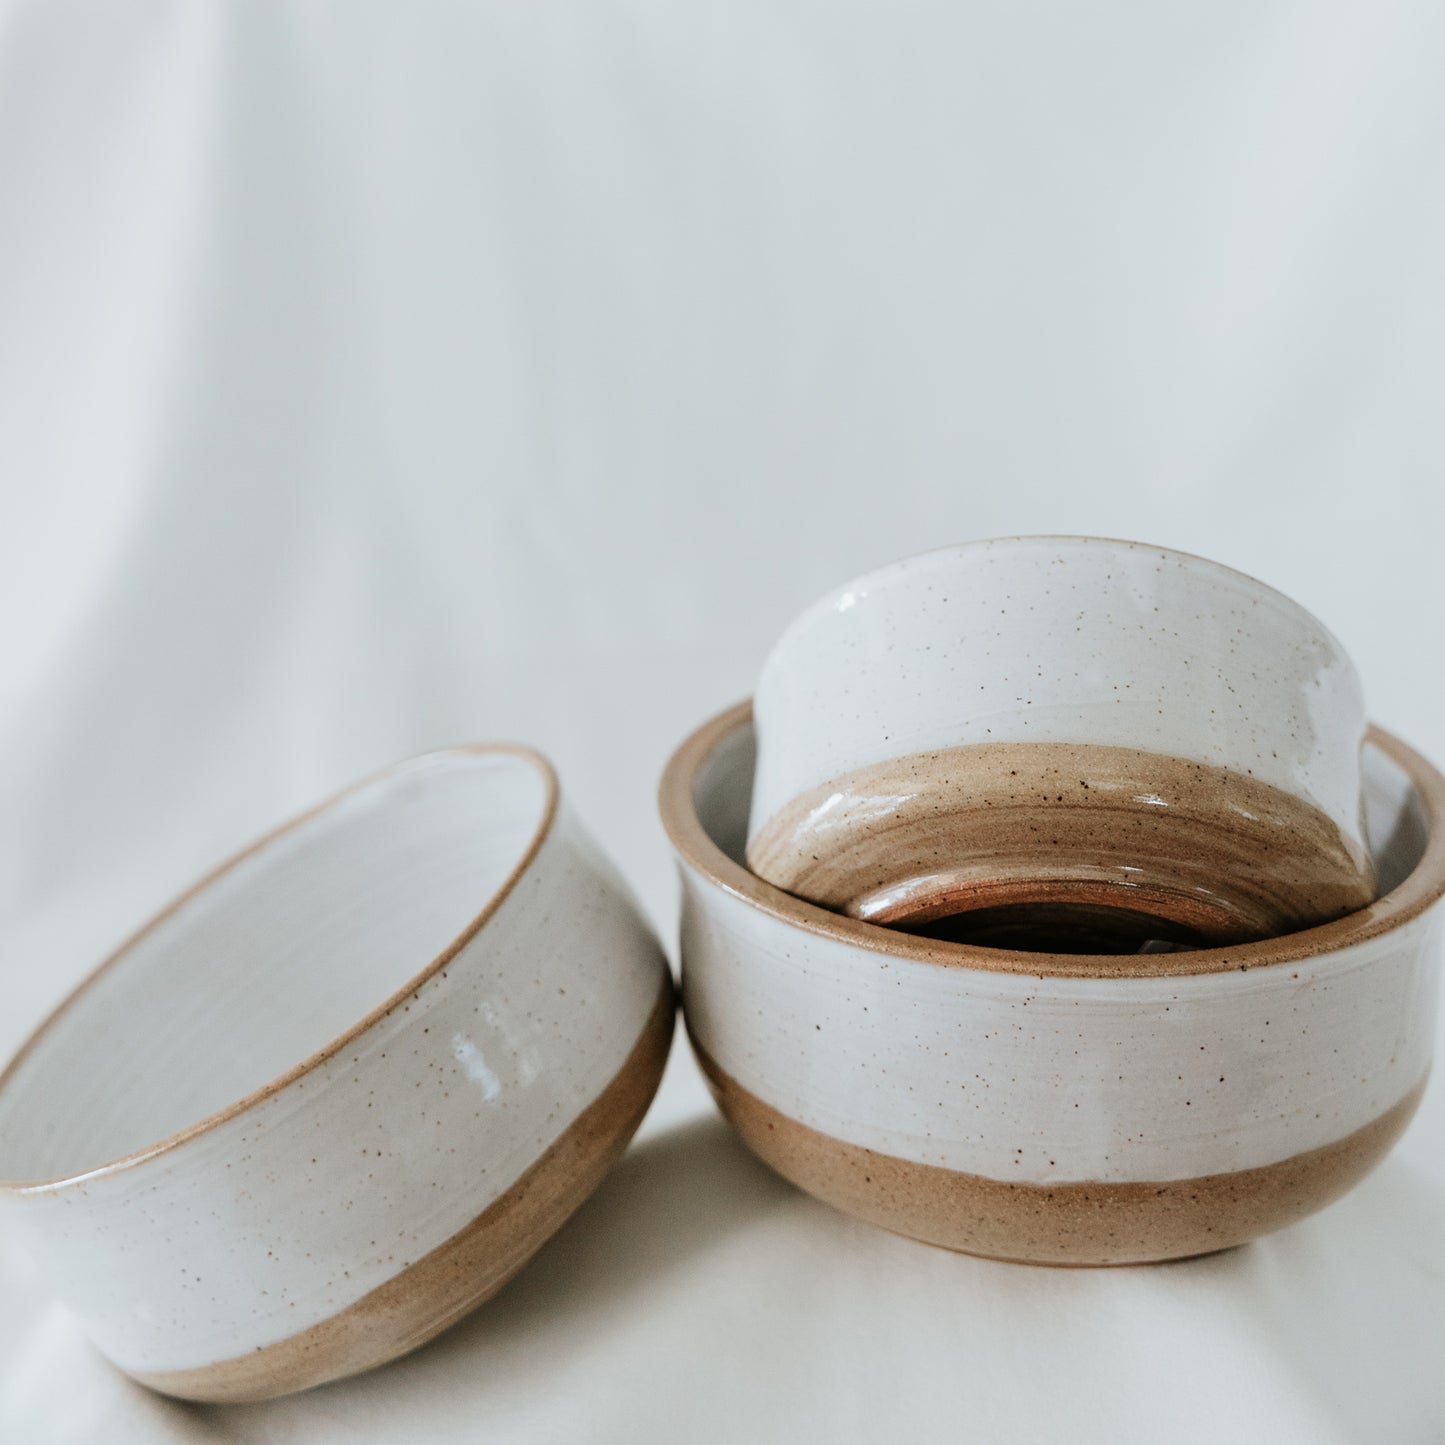 Basic White and Brown Pottery Serving Bowl/ Nesting Bowl